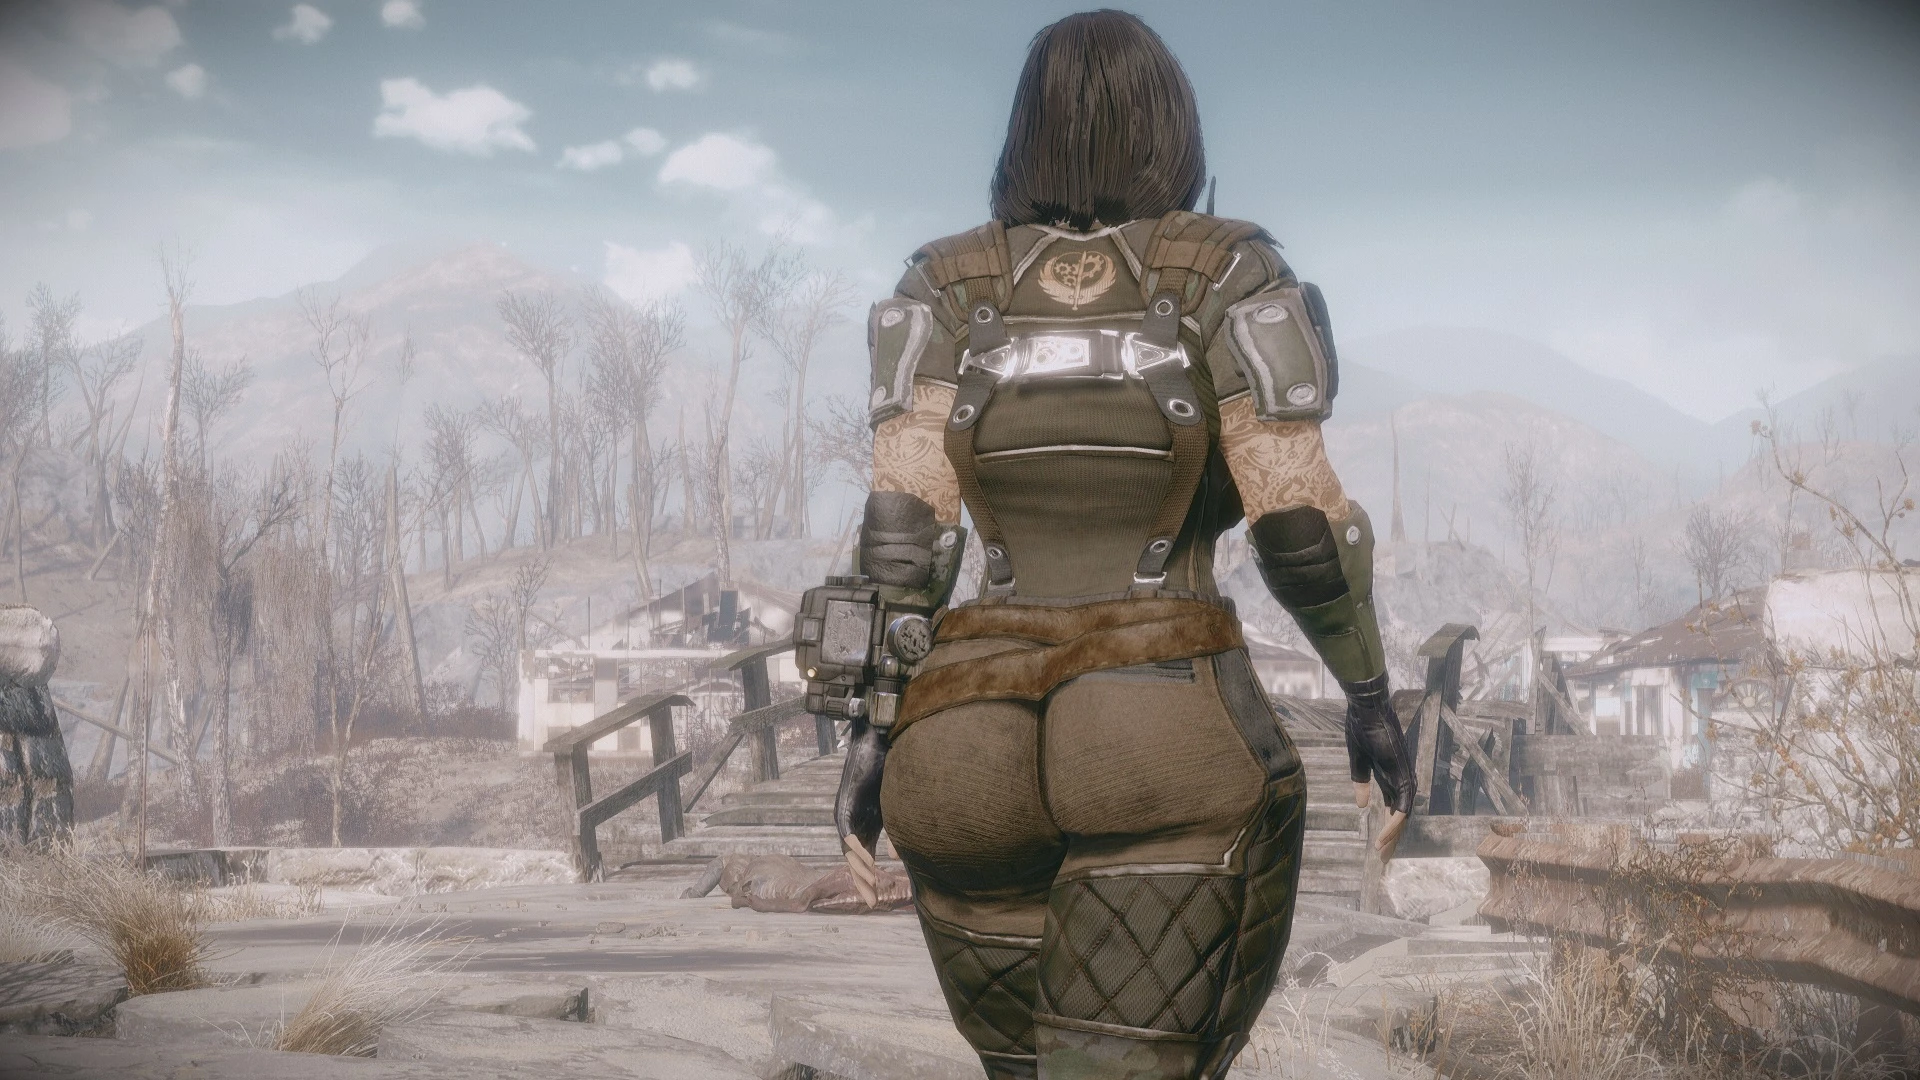 Post Your Sexy Screens Here Page 163 Fallout 4 Adult Mods Loverslab